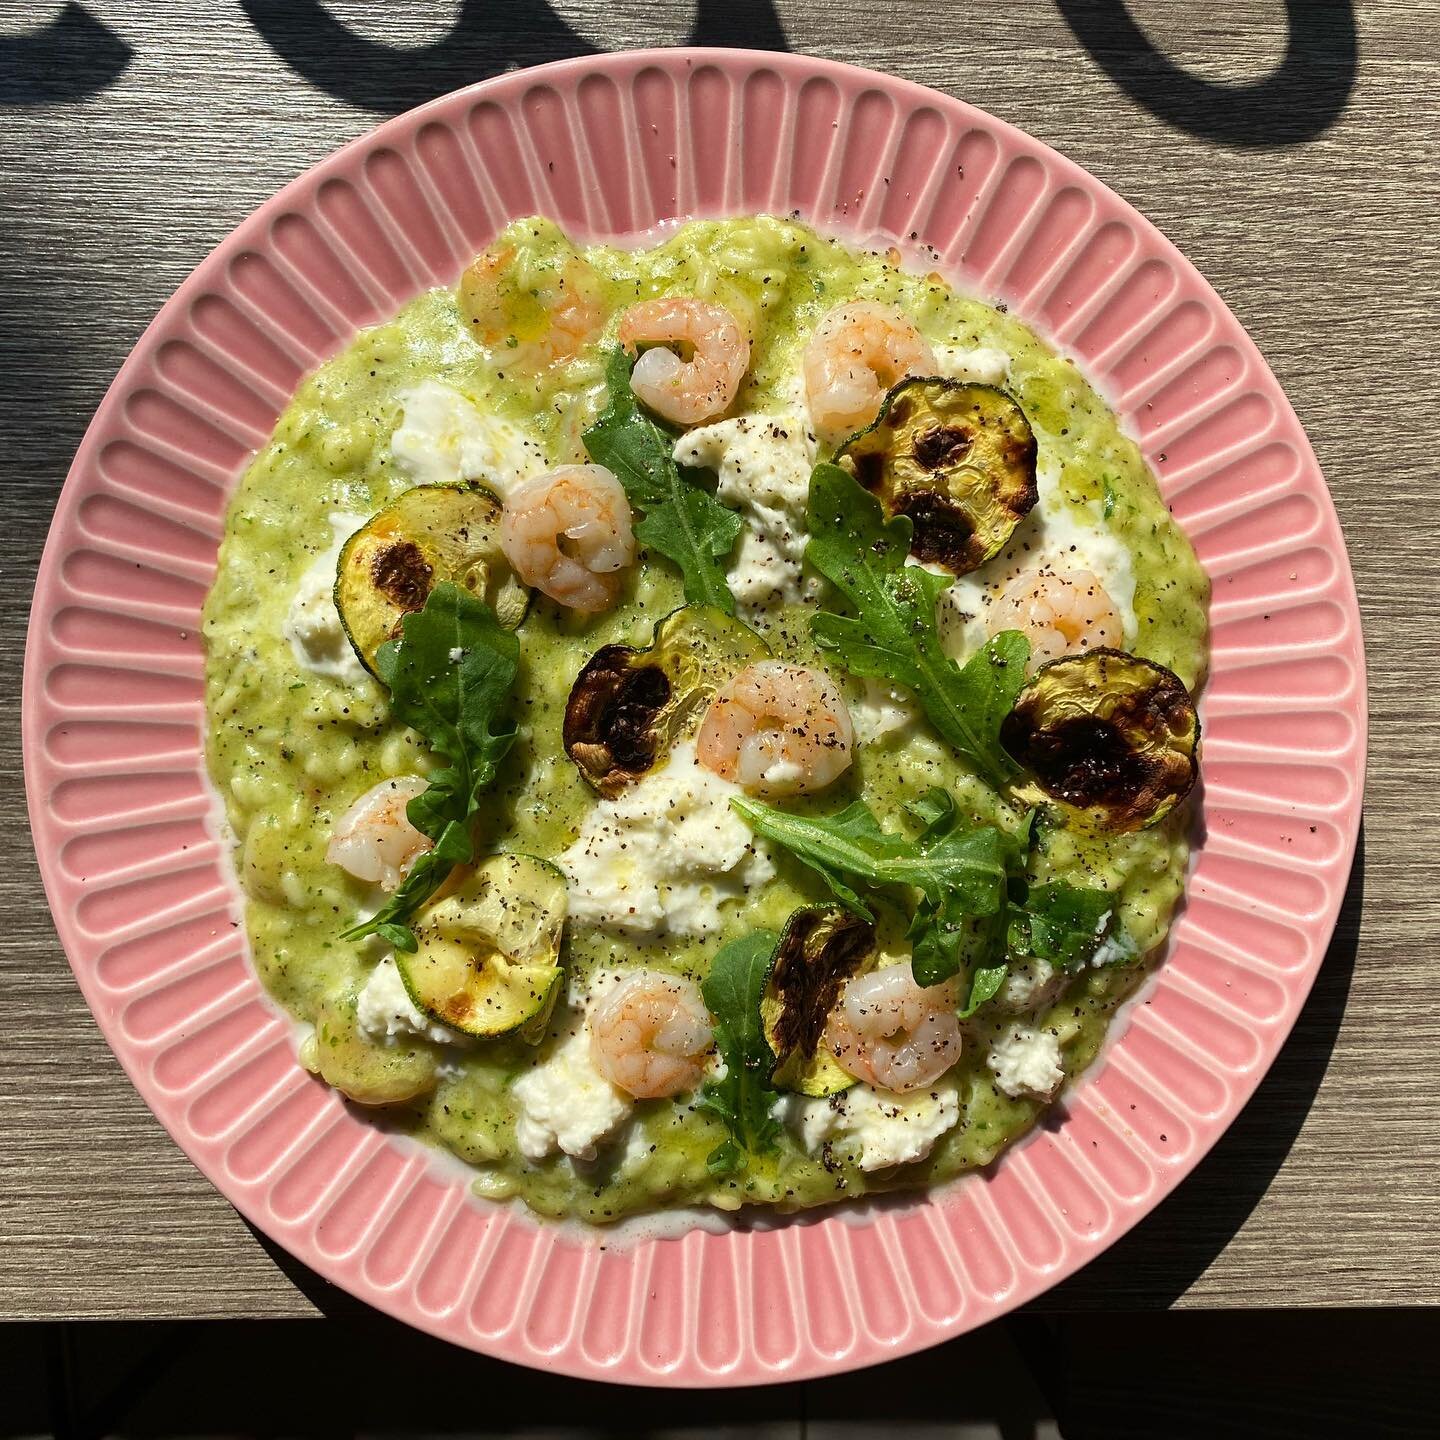 Have you already tried our special of the week ? 

Our super fresh and delicious Risotto with shrimps and zucchini is here for you! ✨

&bull;Carnaroli rice 🍚 
&bull;Zucchini cream 
&bull;Saut&eacute;ed shrimps 🦐
&bull;Baby arugula 🌿
&bull;Zucchini